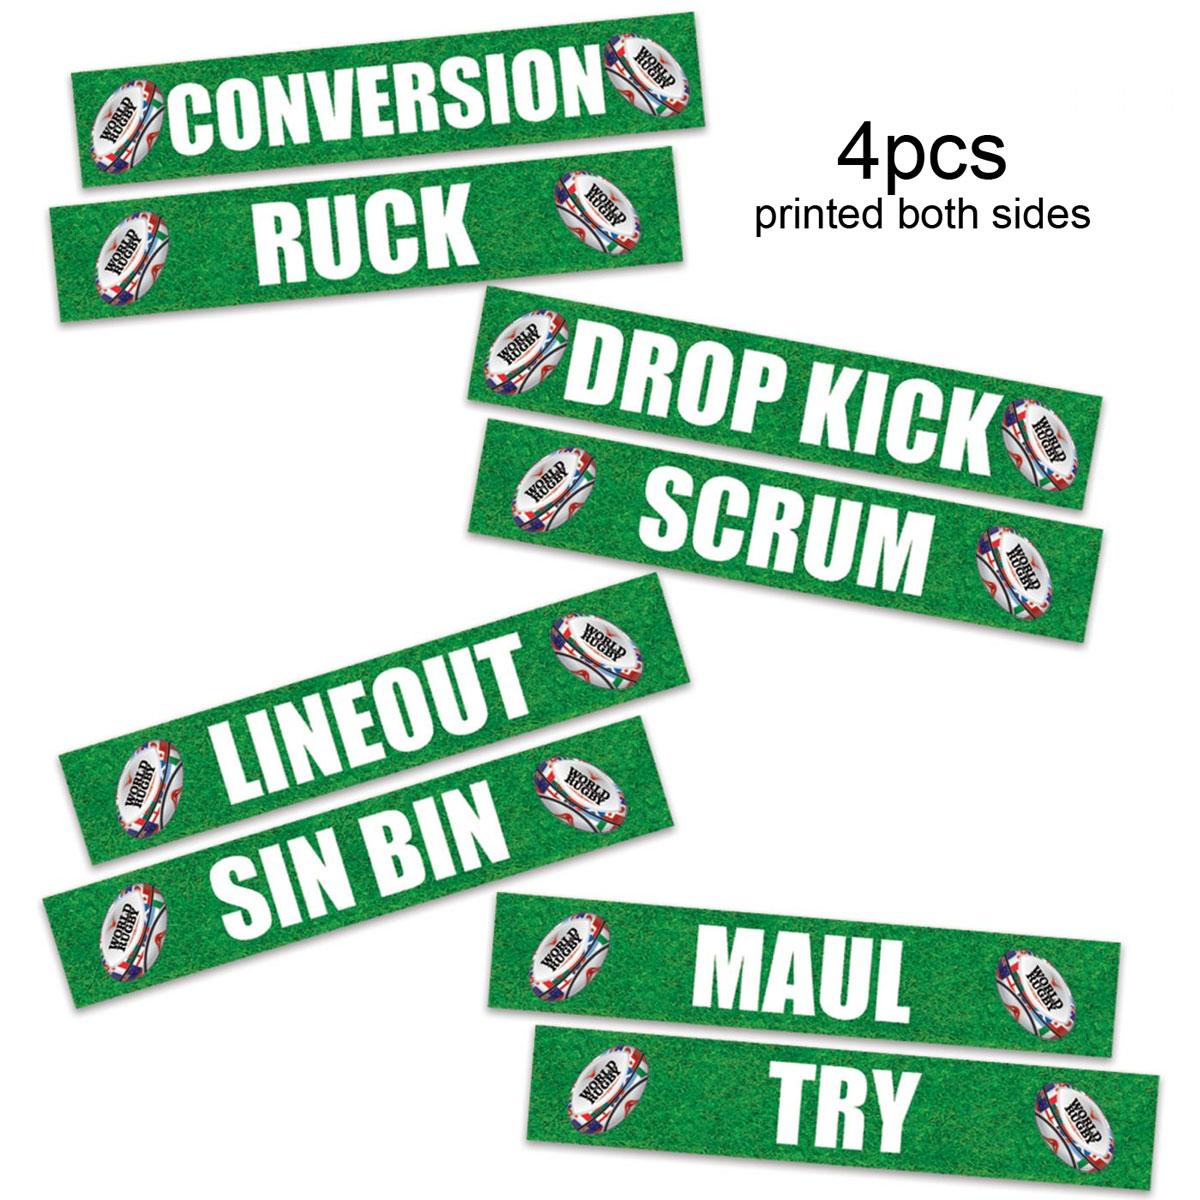 Pk 4 Rugby Phrase Cutout Decorations by Beistle 53732 available here at Karnival Costumes online party shop